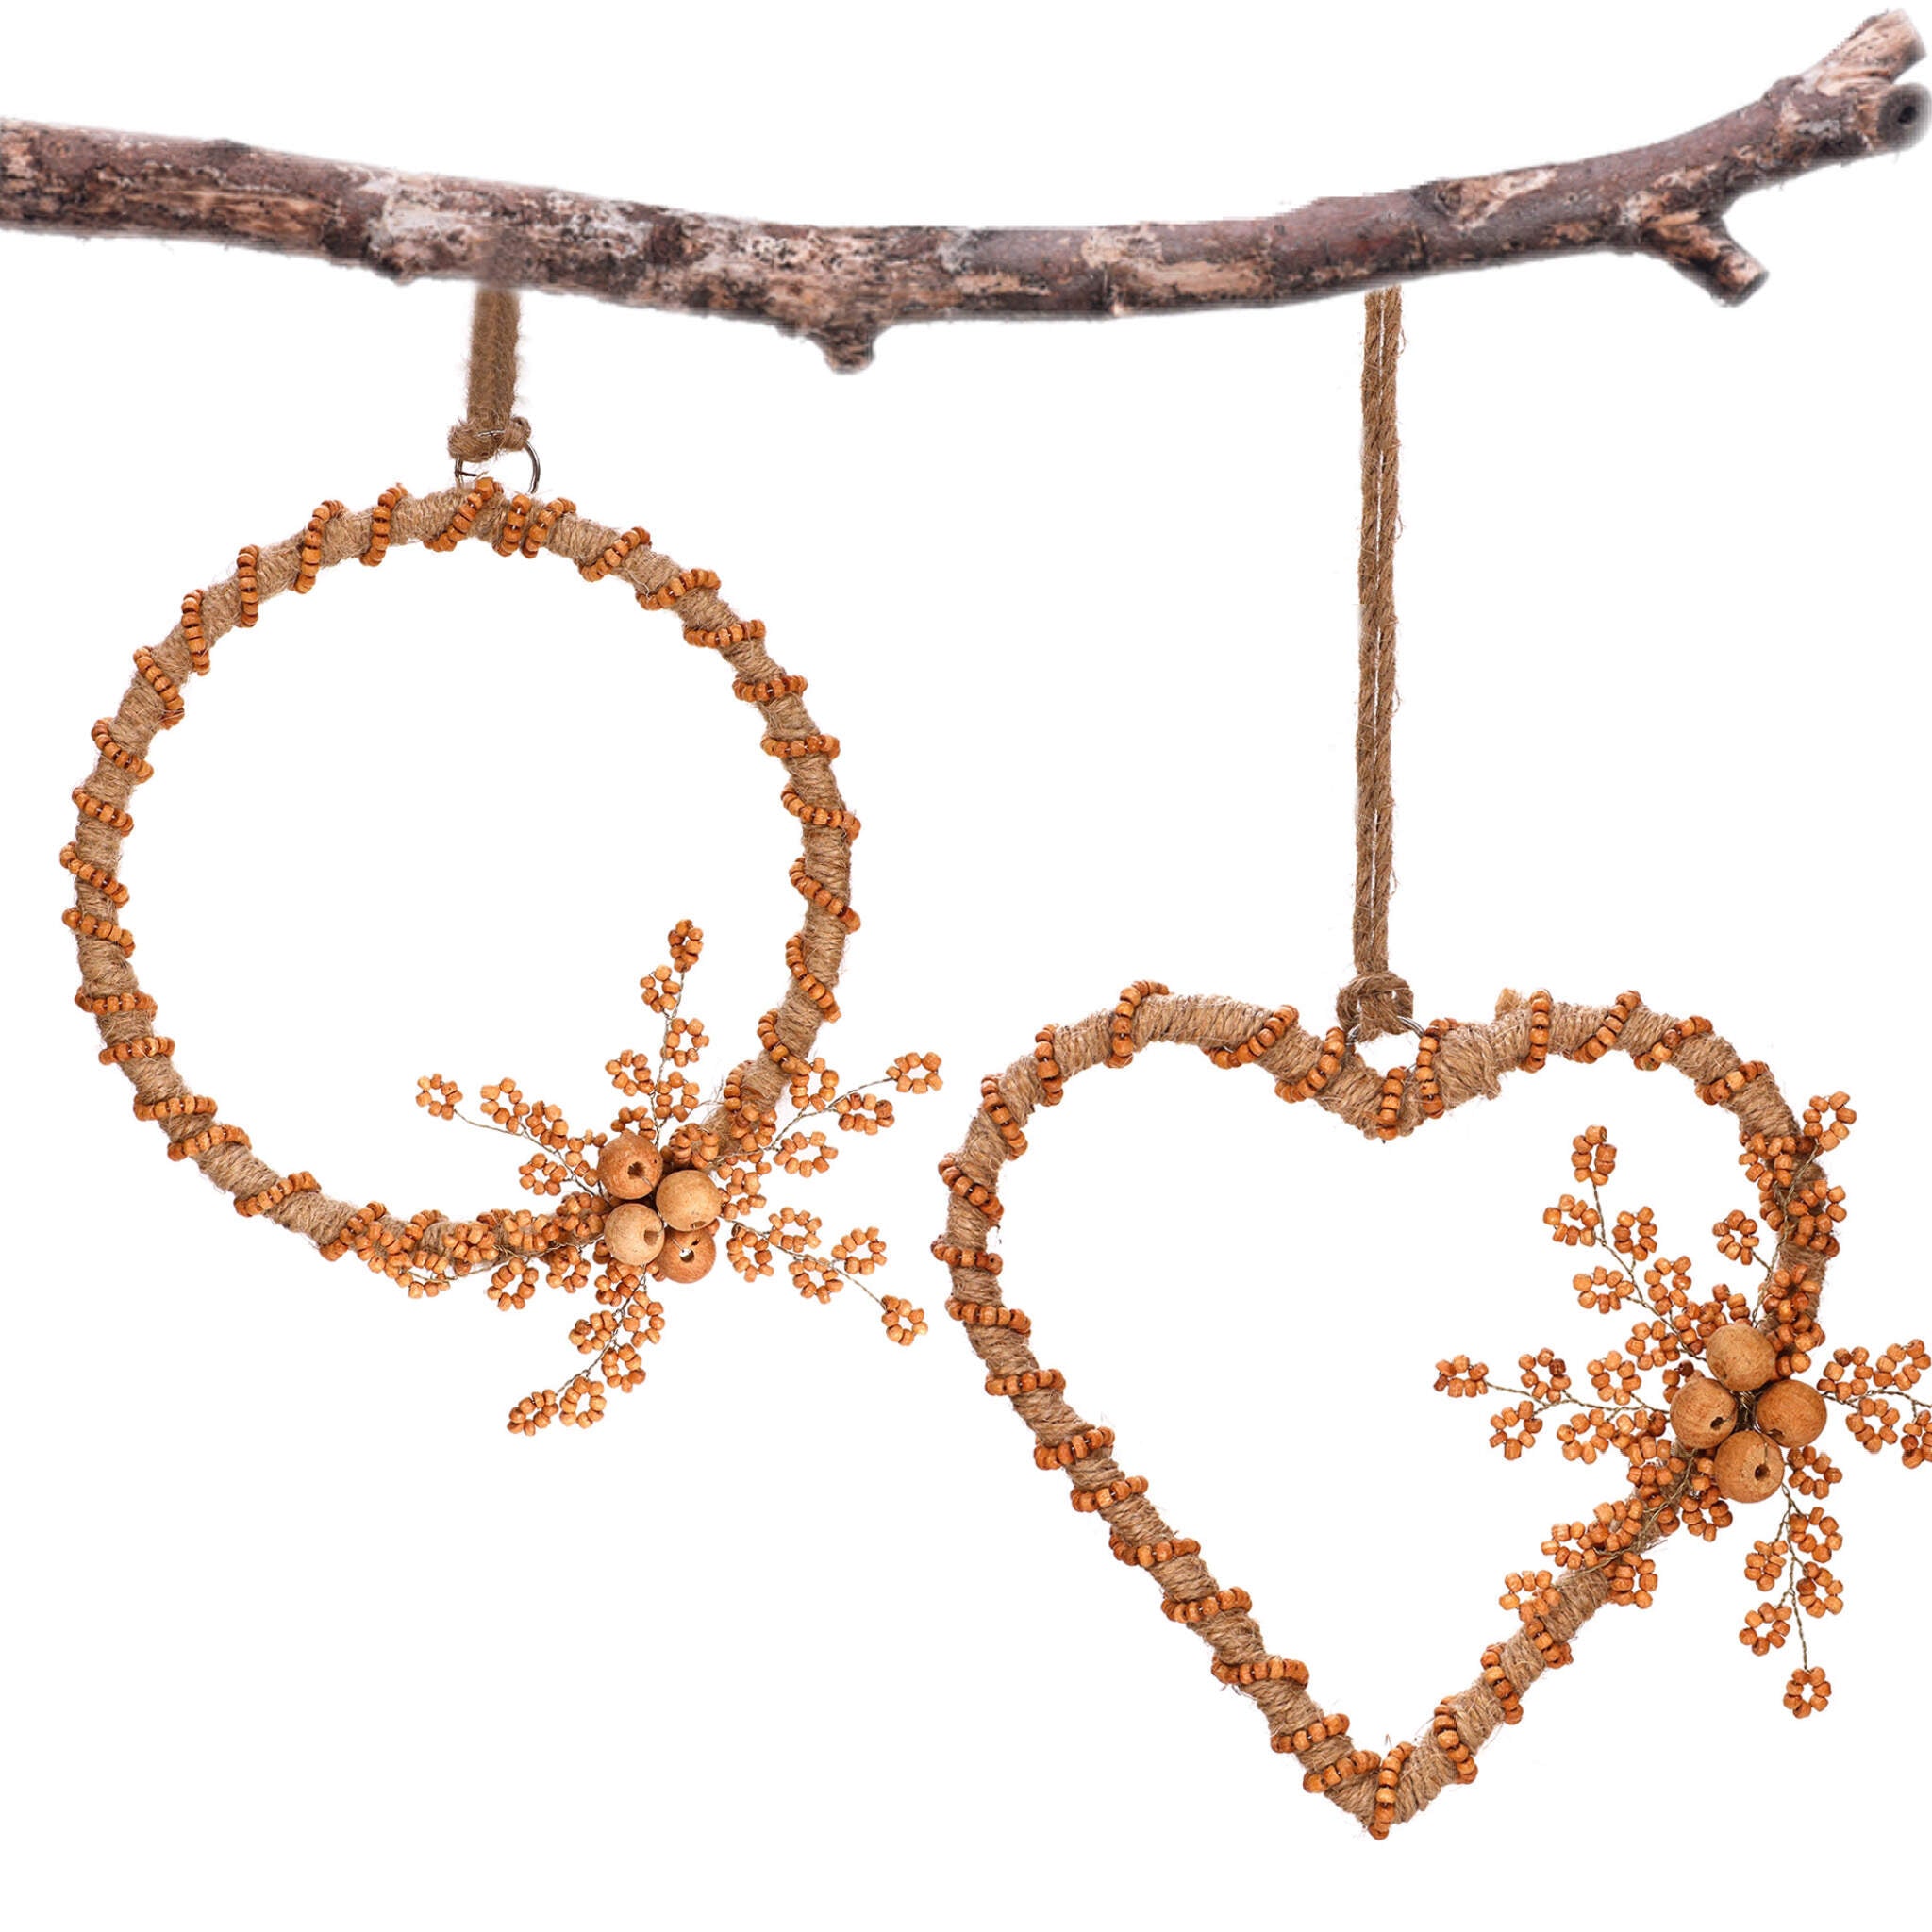 Back To Nature Wreath & Heart Hanging in Natural, Set of 2